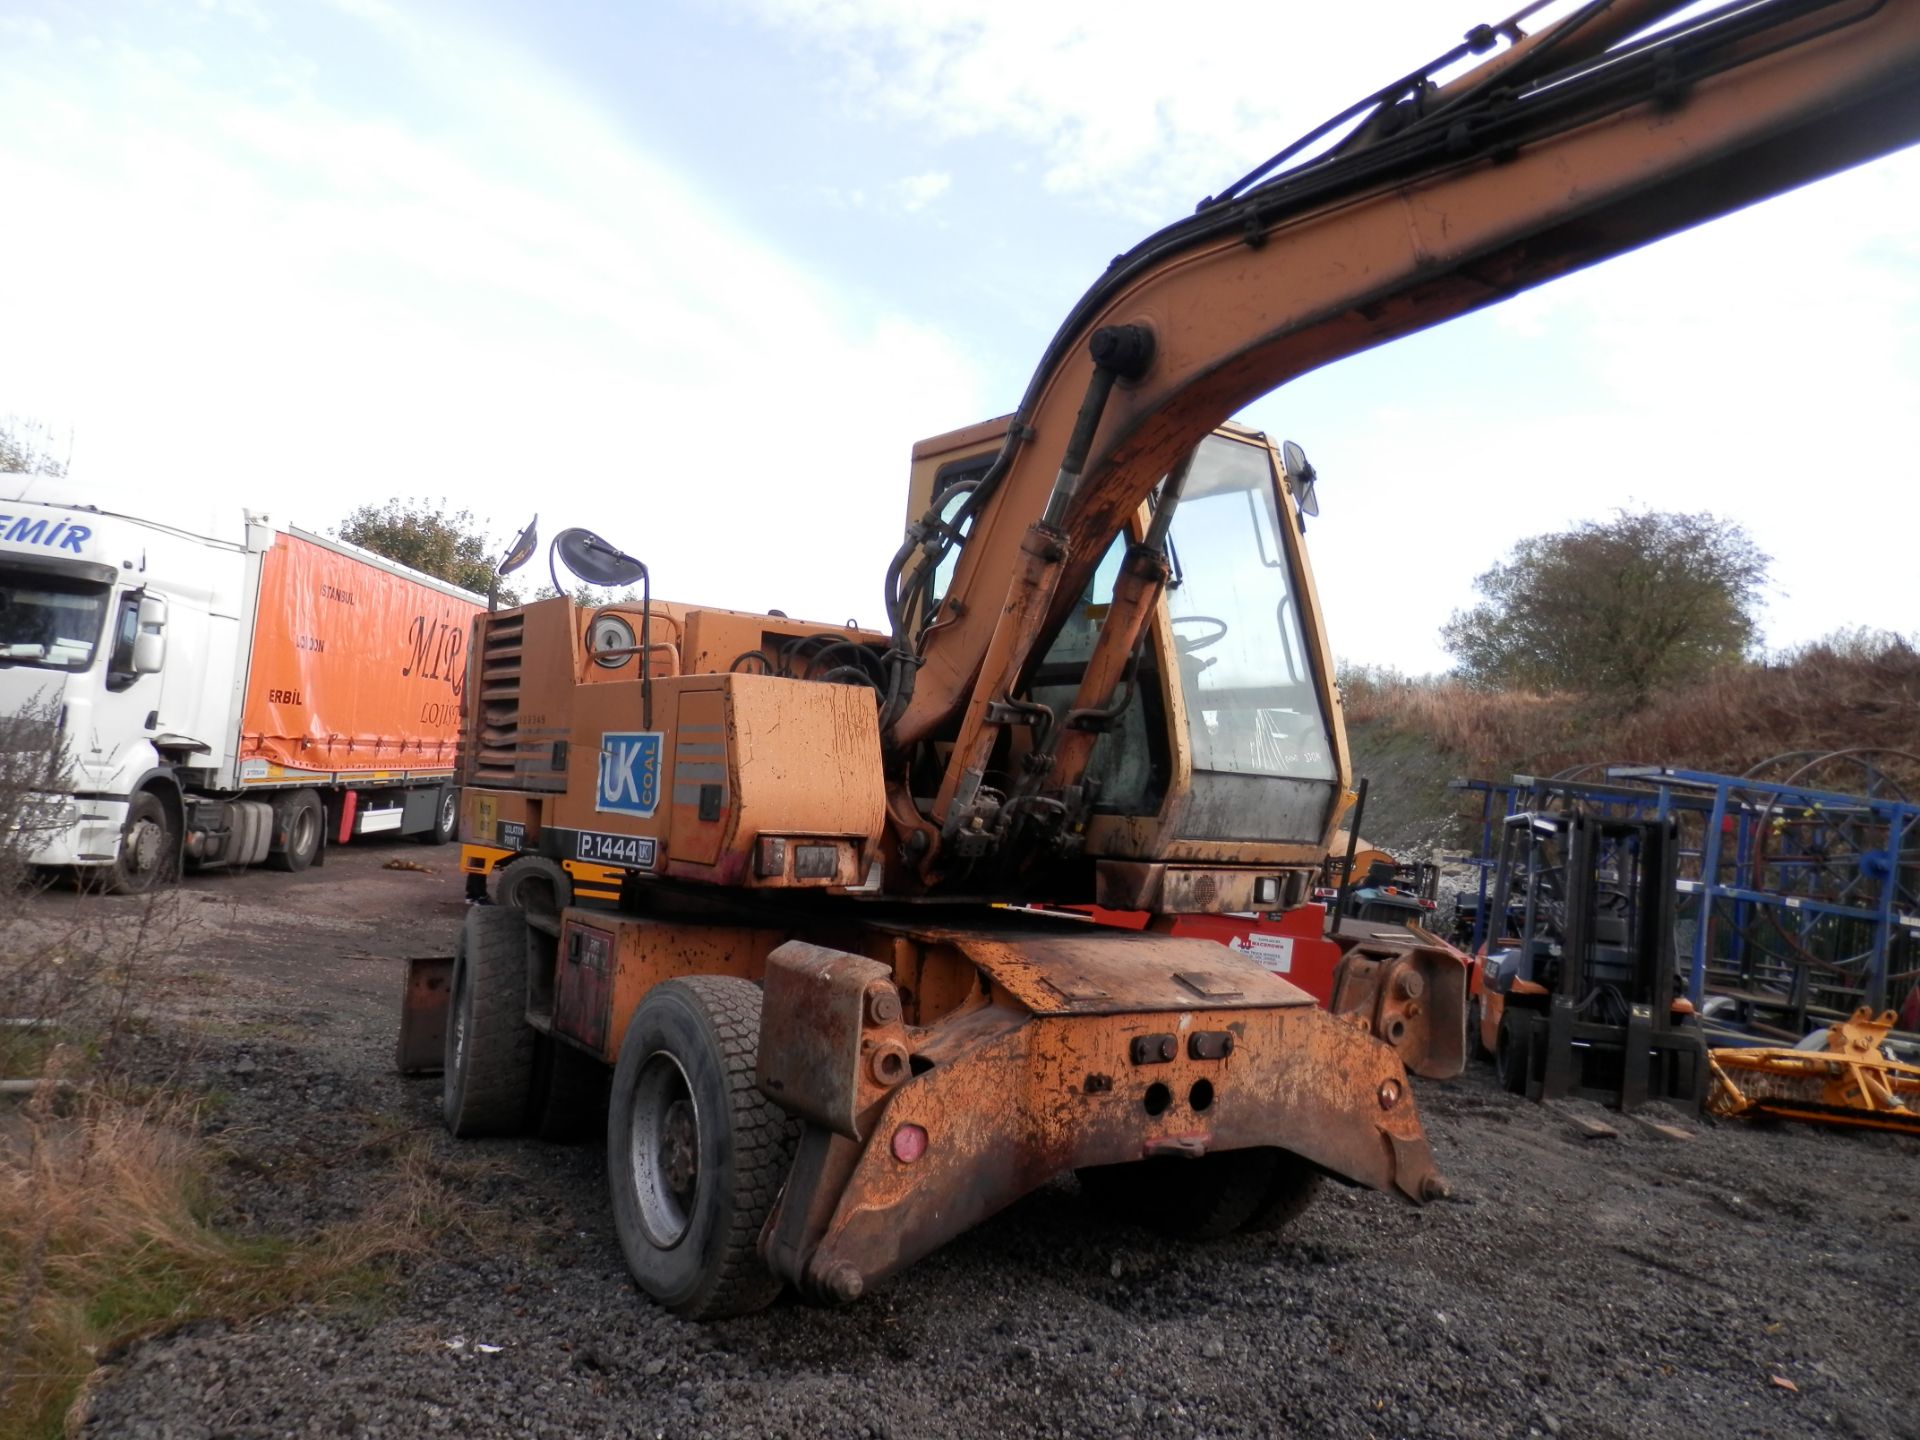 ALL WORKING CASE 688BP 17.2 TONNE DIGGER, 65KW DIESEL ENGINE & MAGNETIC LIFT ATTACHMENT INCLUDED. - Image 4 of 18